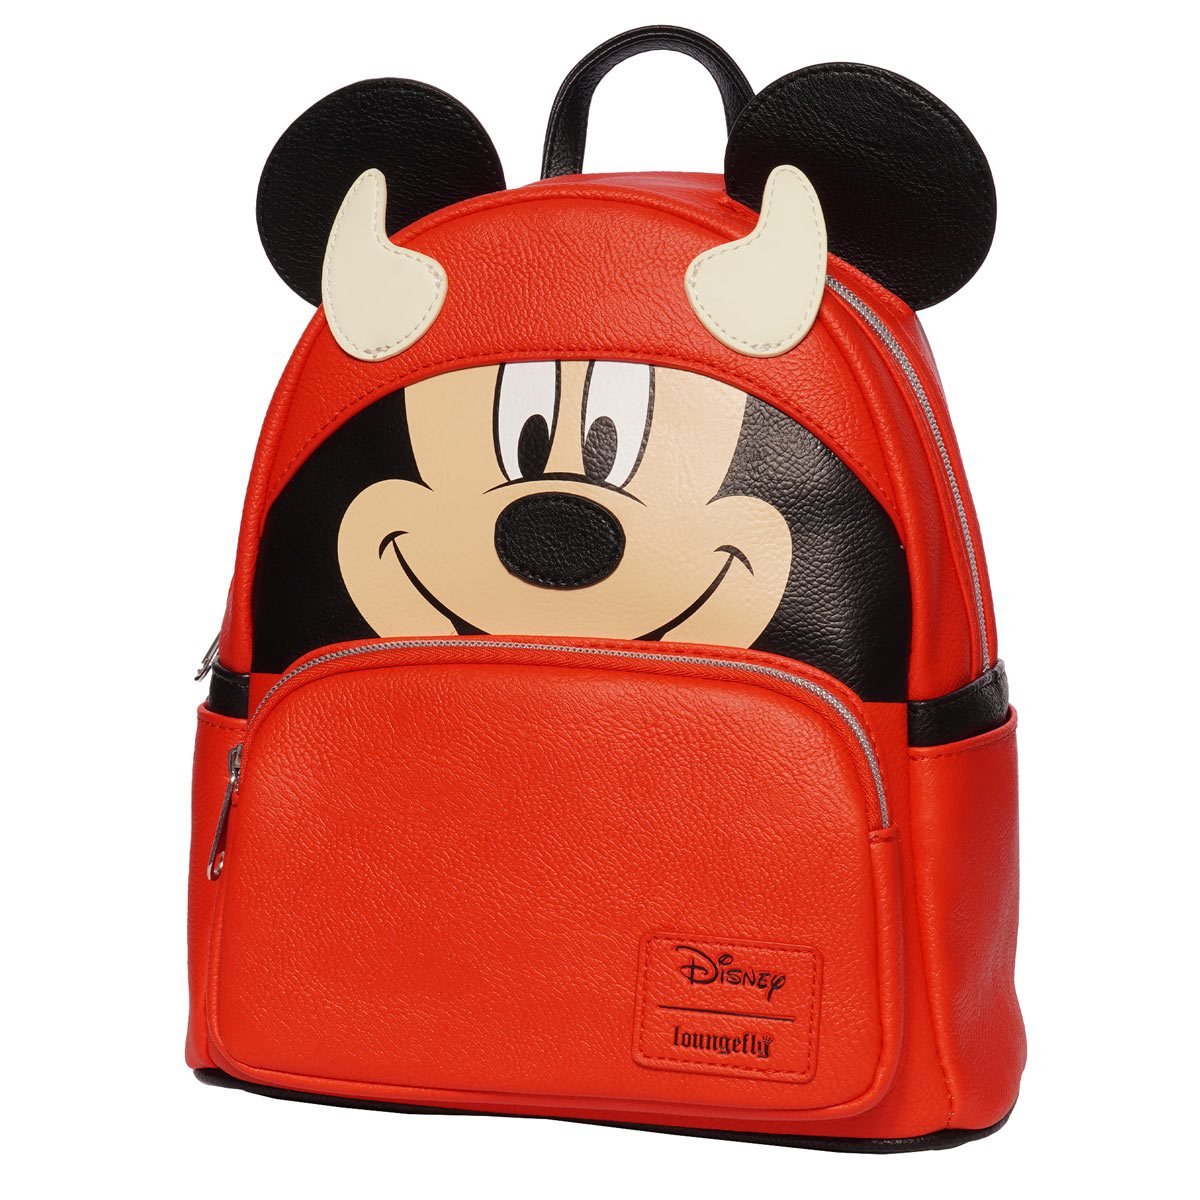 Loungefly Disney Mickey Mouse Devil Mickey Mini Backpack - Entertainment Earth Ex - Alternate Side View